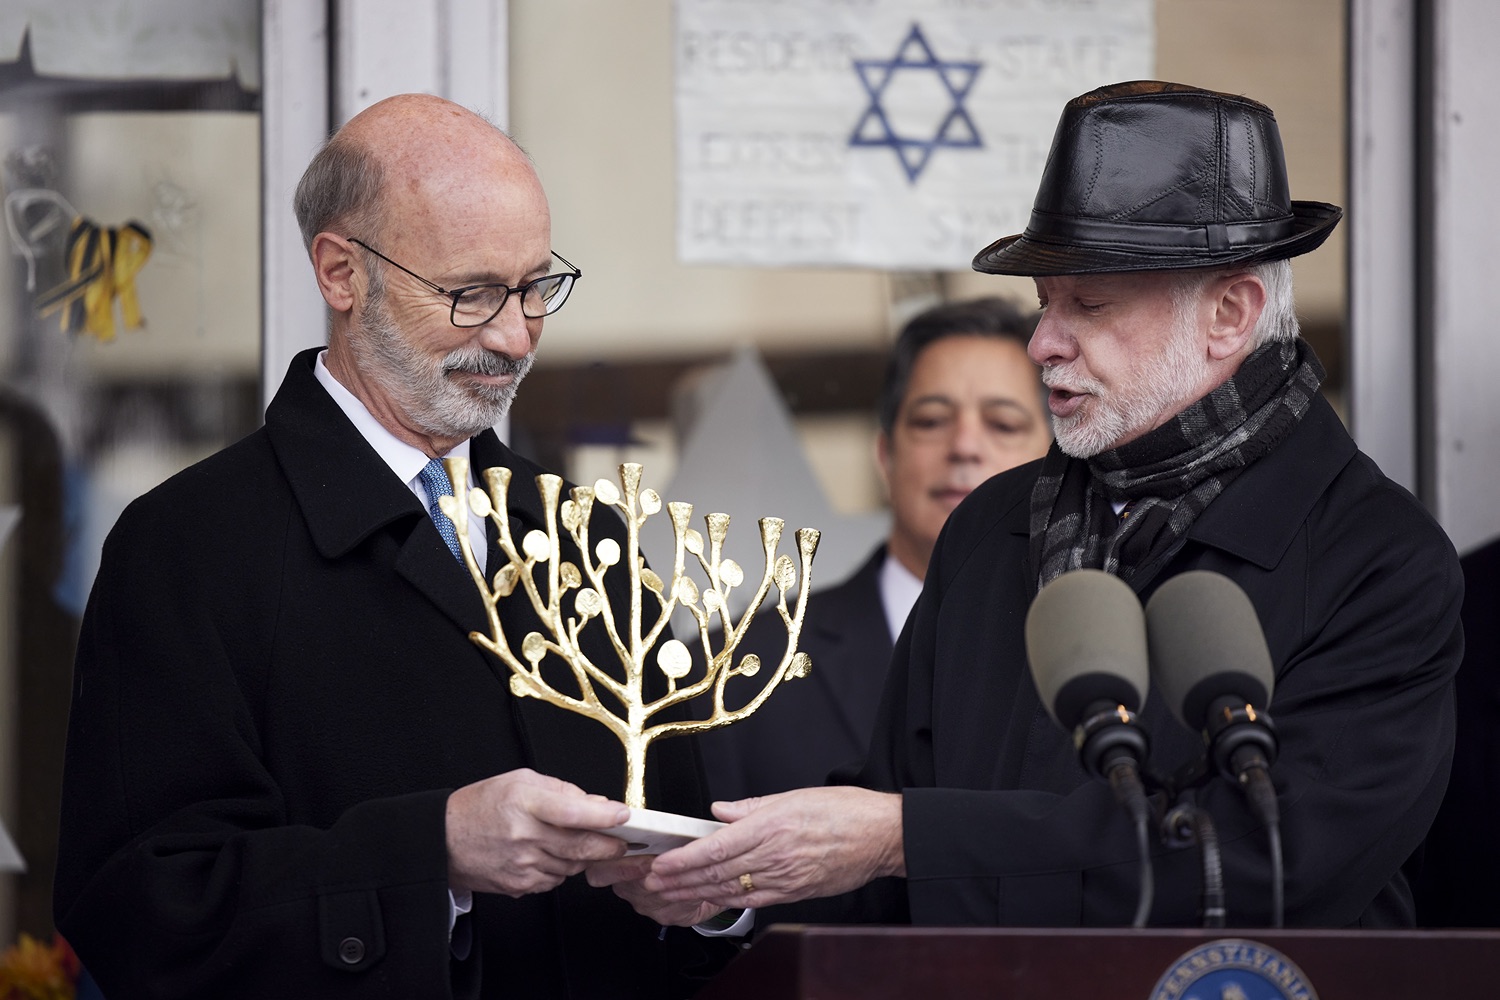 Rabbi Jeffrey Myers presenting a gift to the people of Pennsylvania, a Tree of Life Menorah.  Governor Tom Wolf visited the Tree of Life in Pittsburgh today to announce $6.6 million in state funding to support the rebuilding and reimagining of the synagogue. The governor was joined by Rabbi Jeffrey Myers, Senate Democratic Leader Jay Costa and members of the Tree of Lifes REMEMBER. REBUILD. RENEW campaign which will transform the site of the worst antisemitic attack in U.S. history into a new place of hope, remembrance, and education. Pittsburgh, PA - December 6, 2021<br><a href="https://filesource.amperwave.net/commonwealthofpa/photo/20308_gov_treeOfLife_dz_001_copy.jpg" target="_blank">⇣ Download Photo</a>